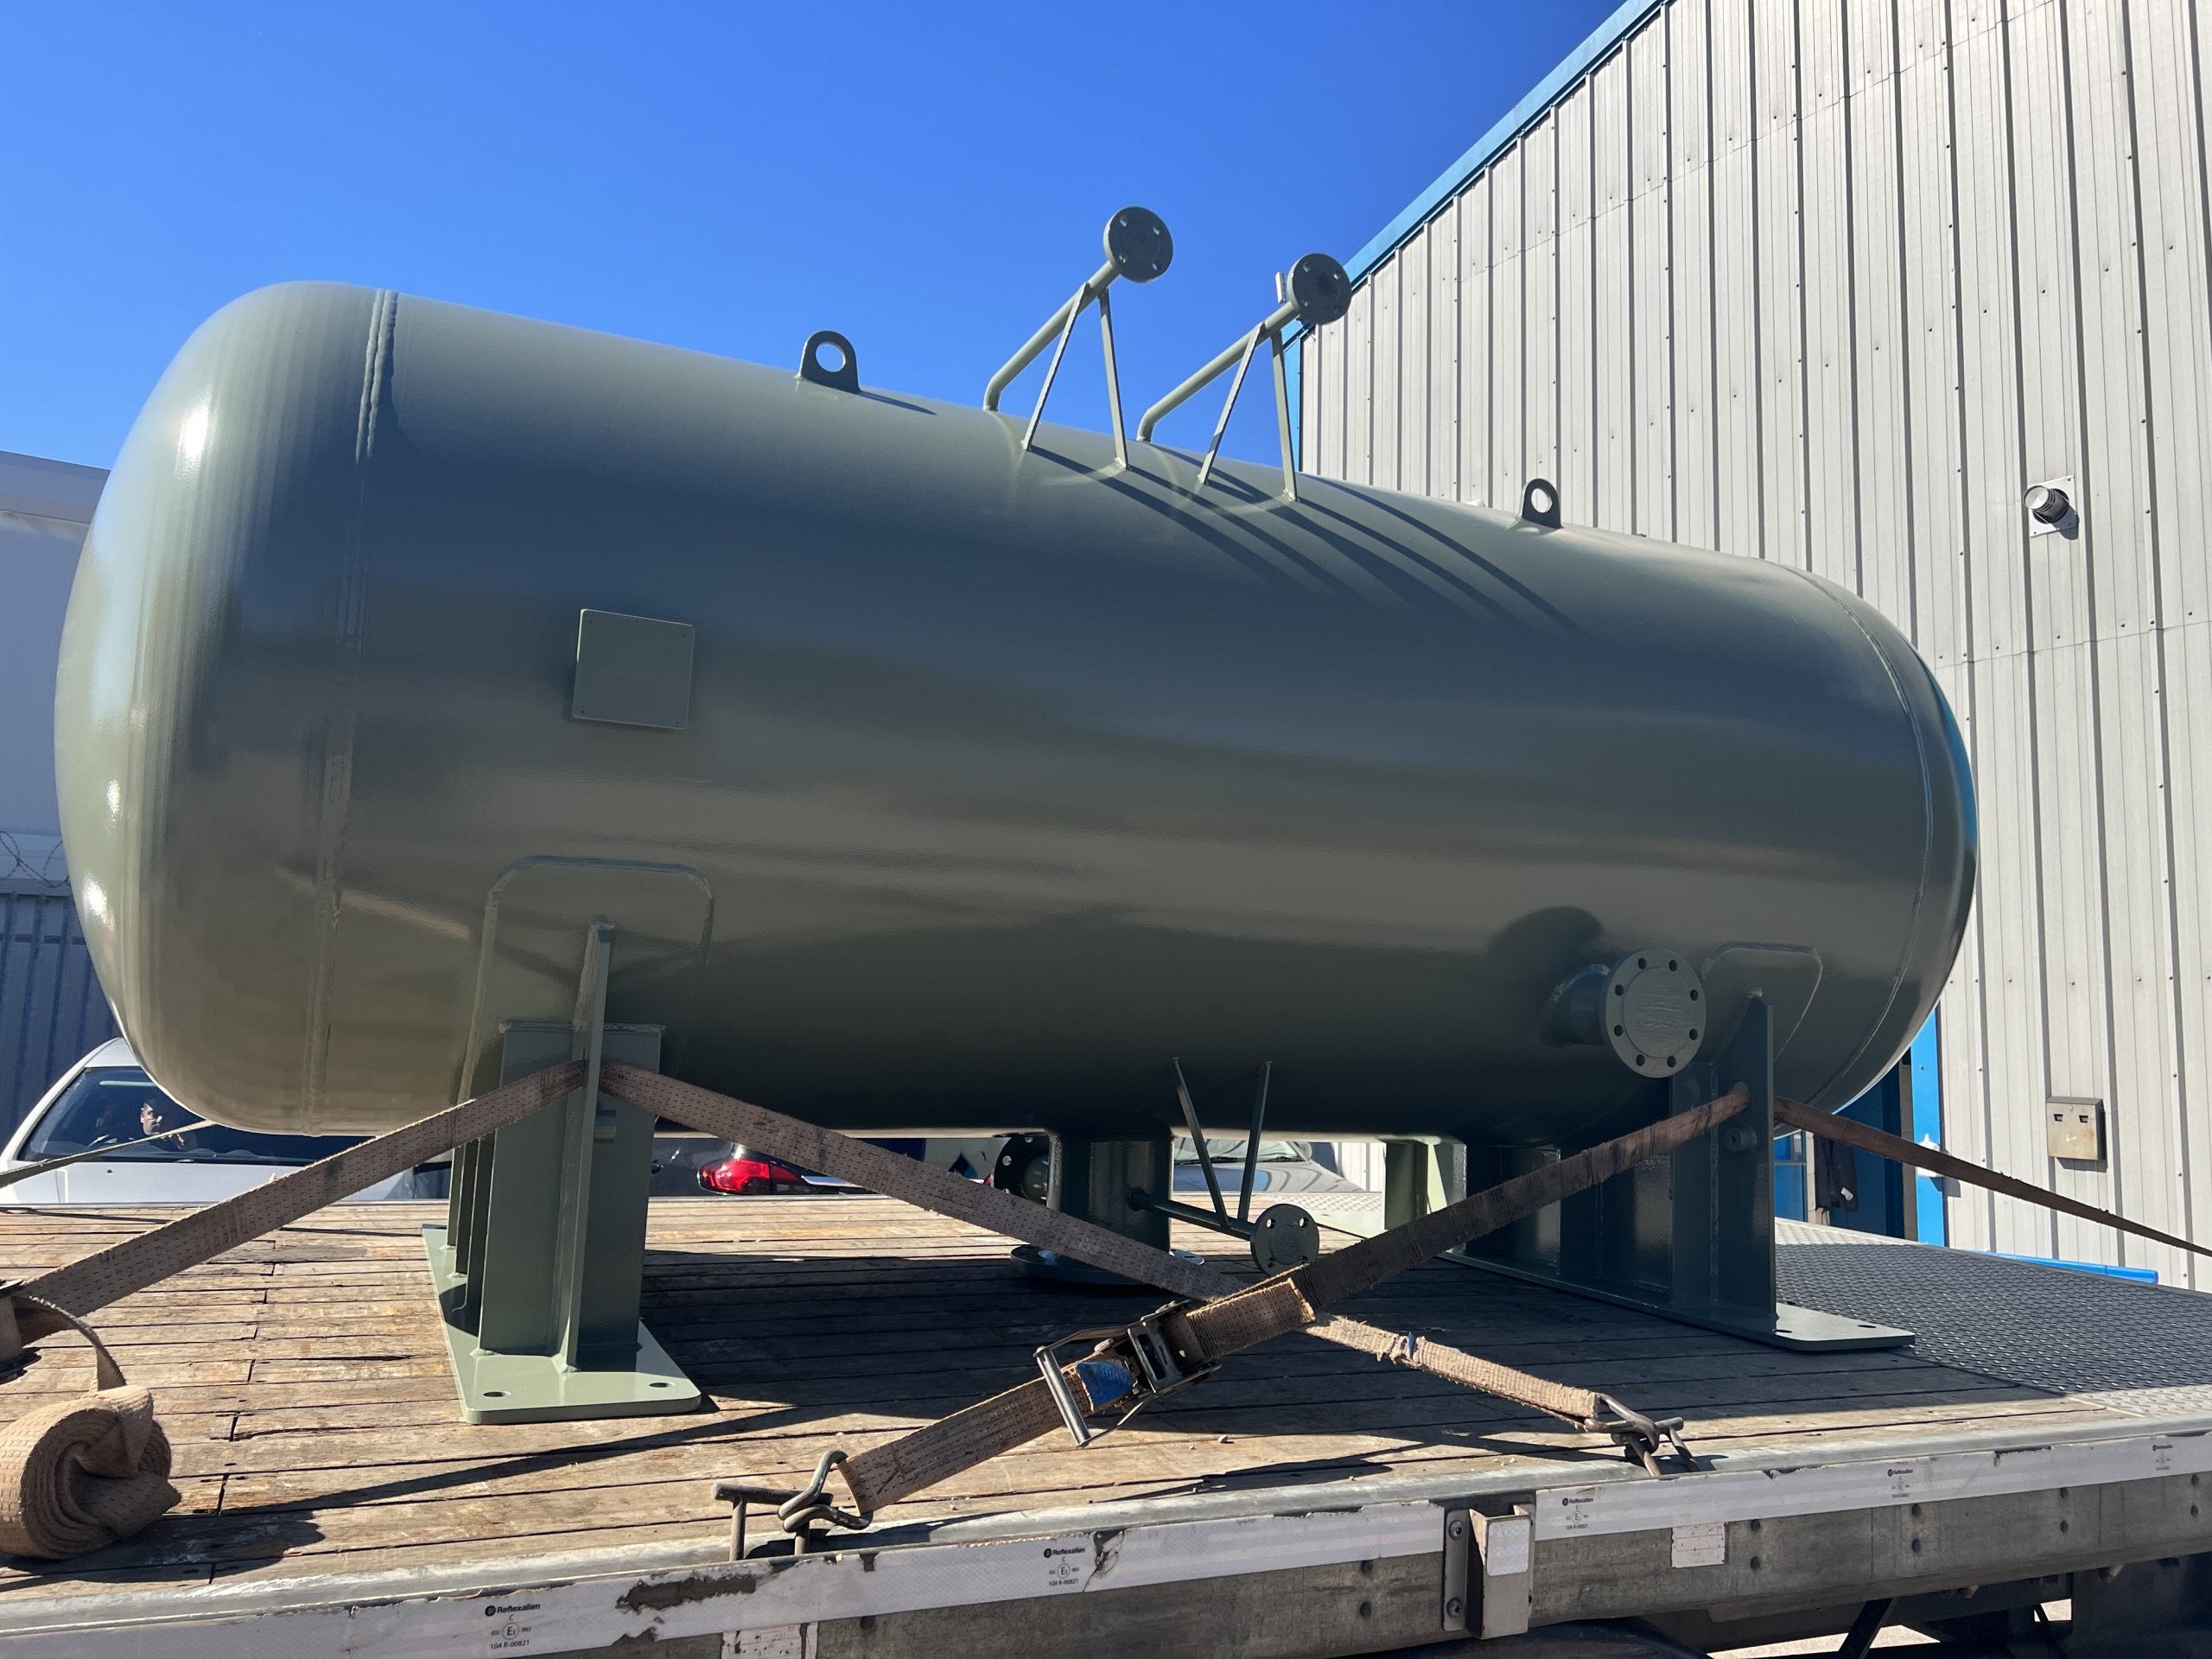 UKCA Water Pressure vessel made from stainless steel 316L with a painted surface finish